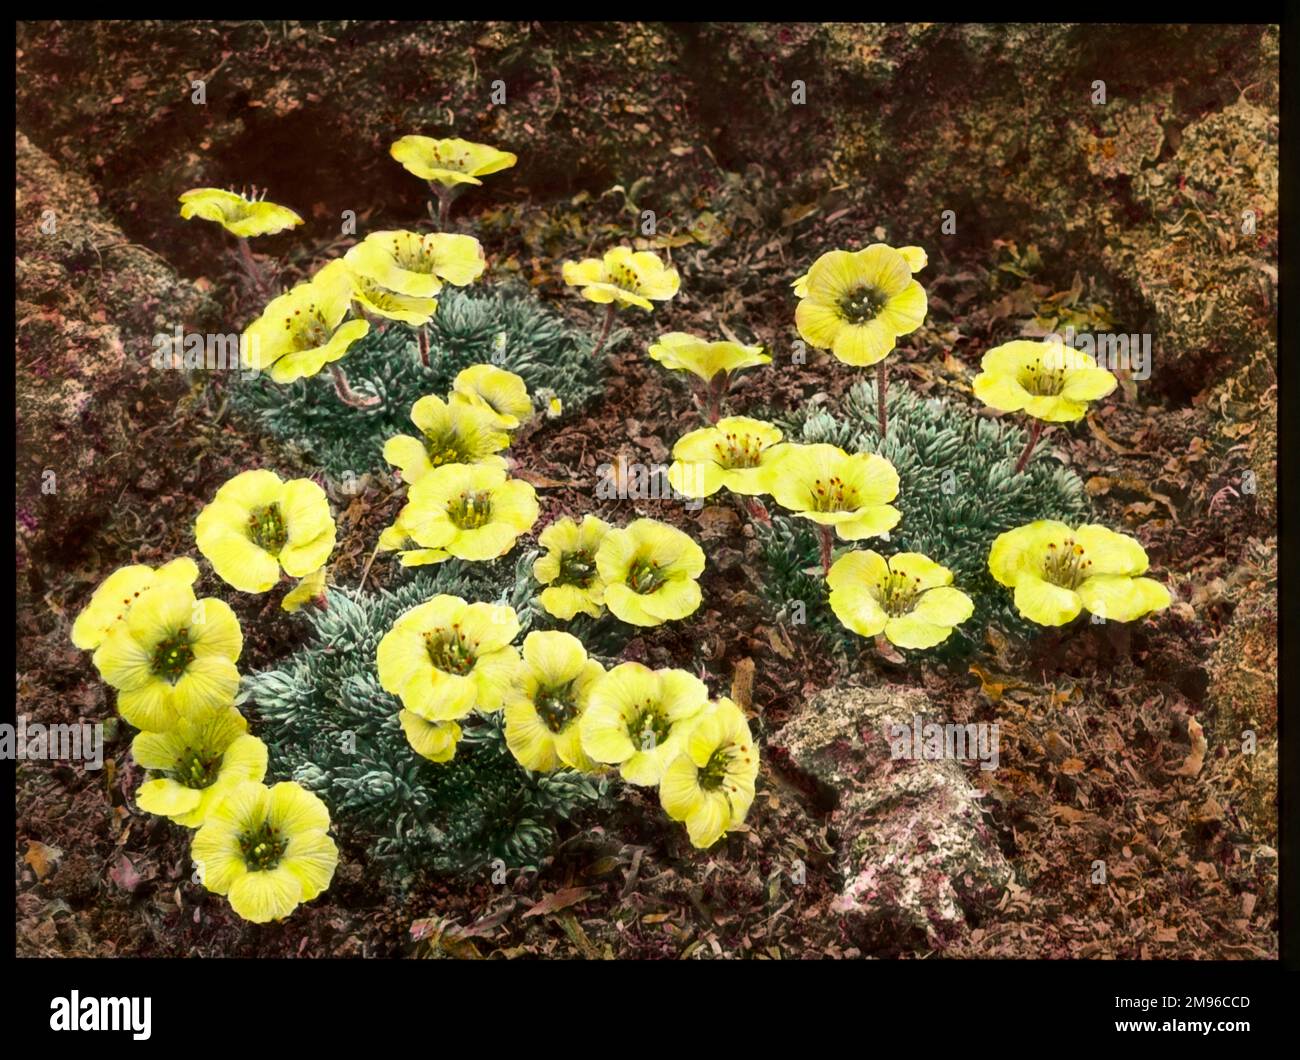 Saxifraga Faldonside, a flowering plant of the Saxifragaceae family (commonly known as saxifrages or stone breakers because of their ability to grow in the cracks between rocks).  Seen here growing in a rocky setting, with bright yellow flowers. Stock Photo